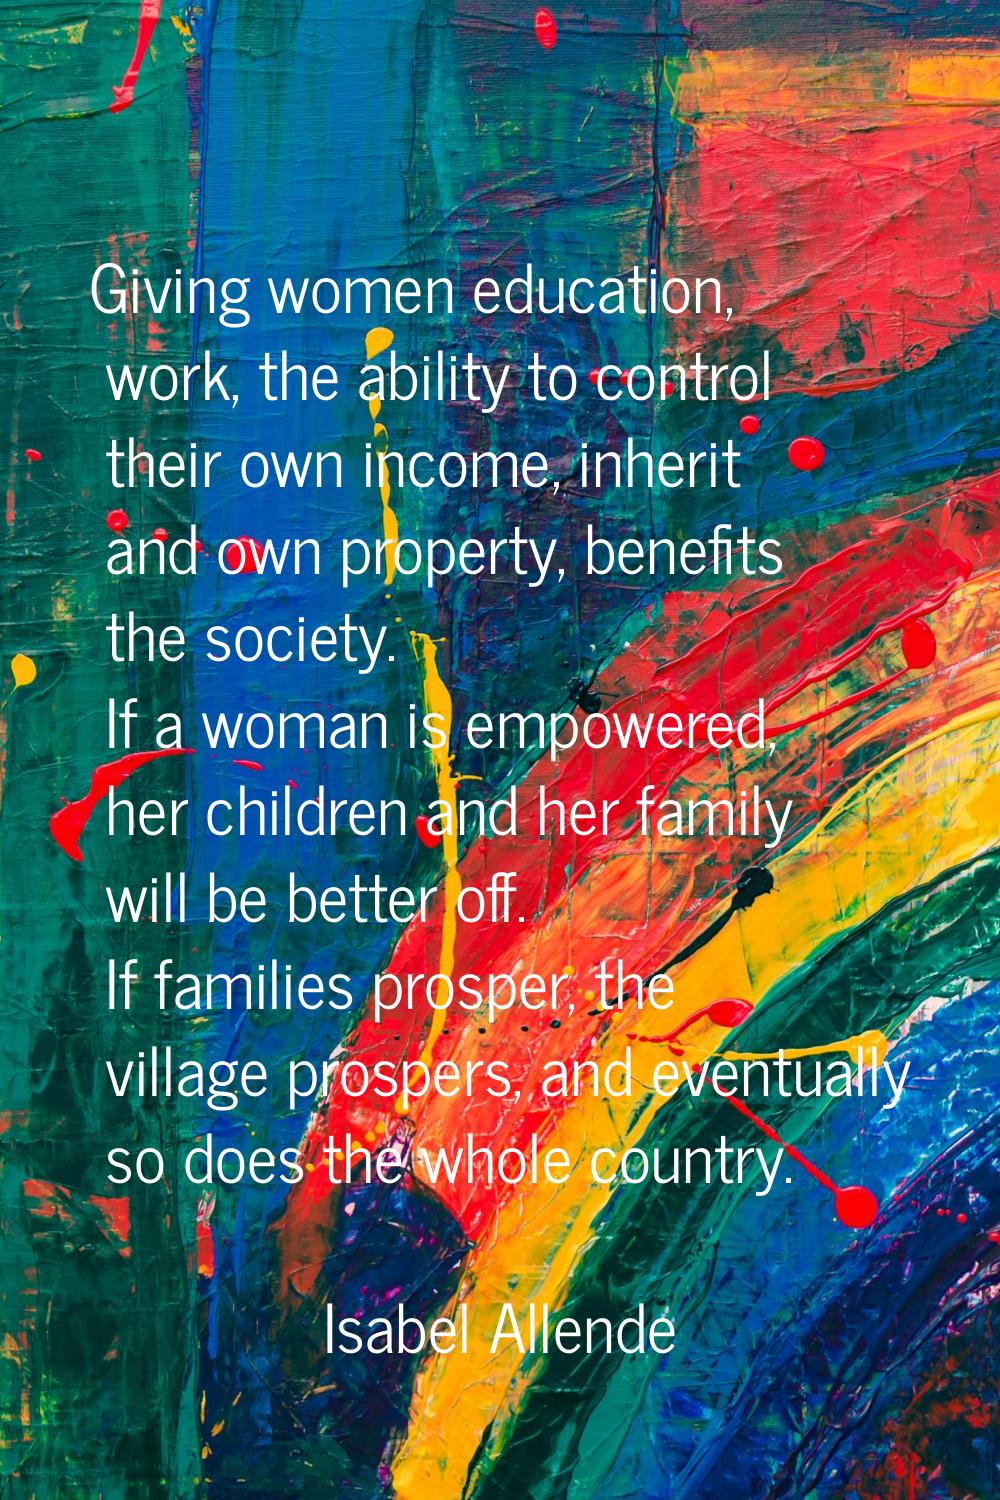 Giving women education, work, the ability to control their own income, inherit and own property, be